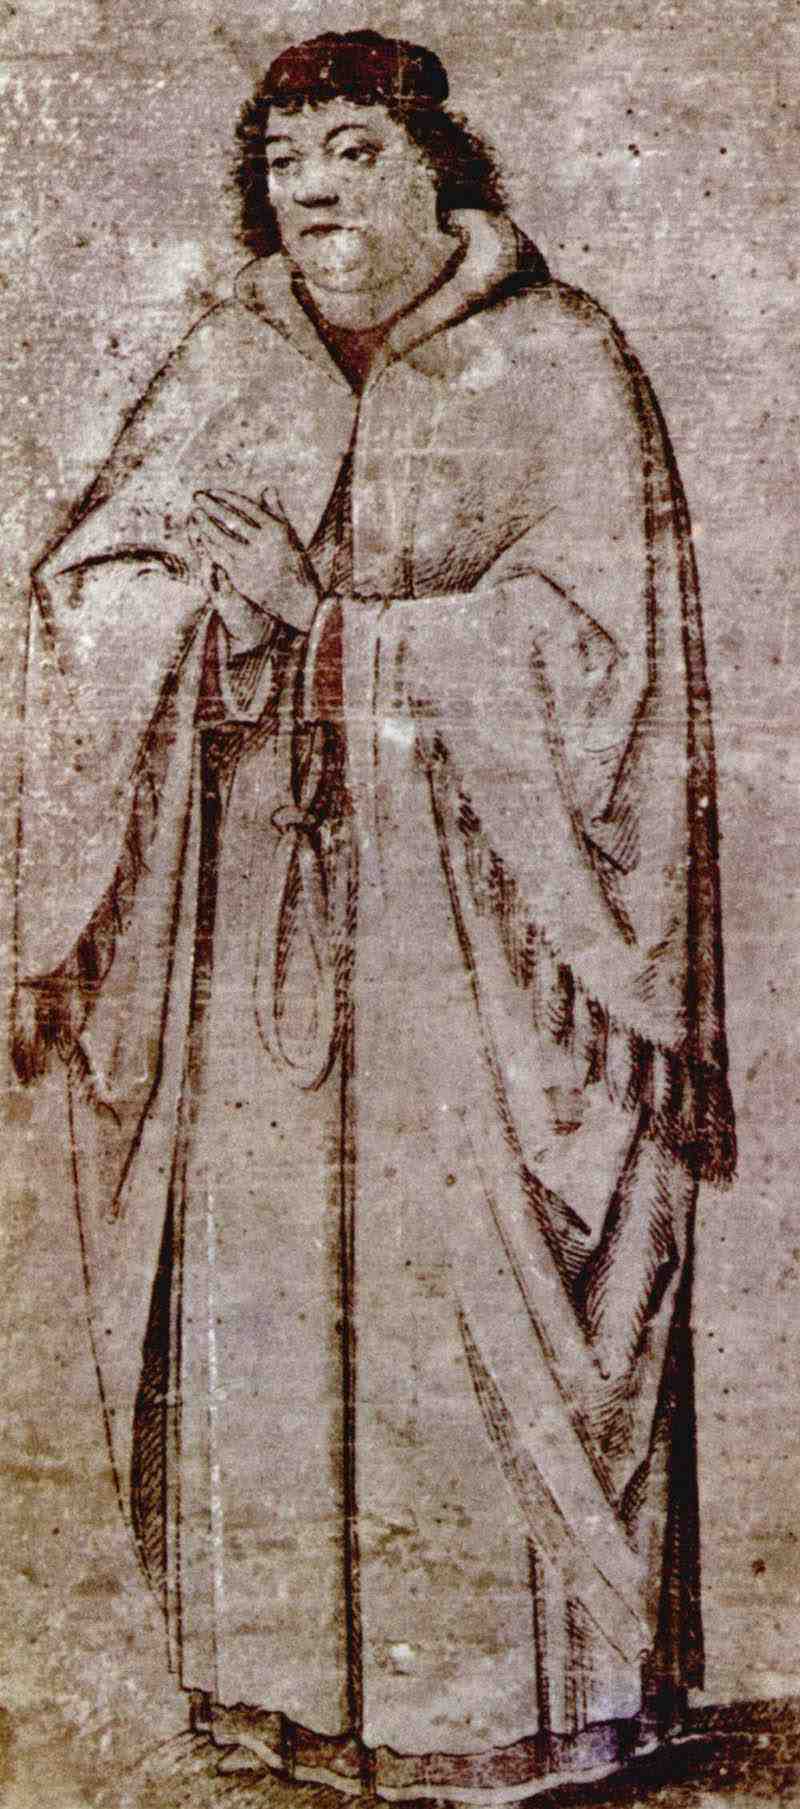 Standing clergyman with folded hands. French master of the 2nd half of the 15th century